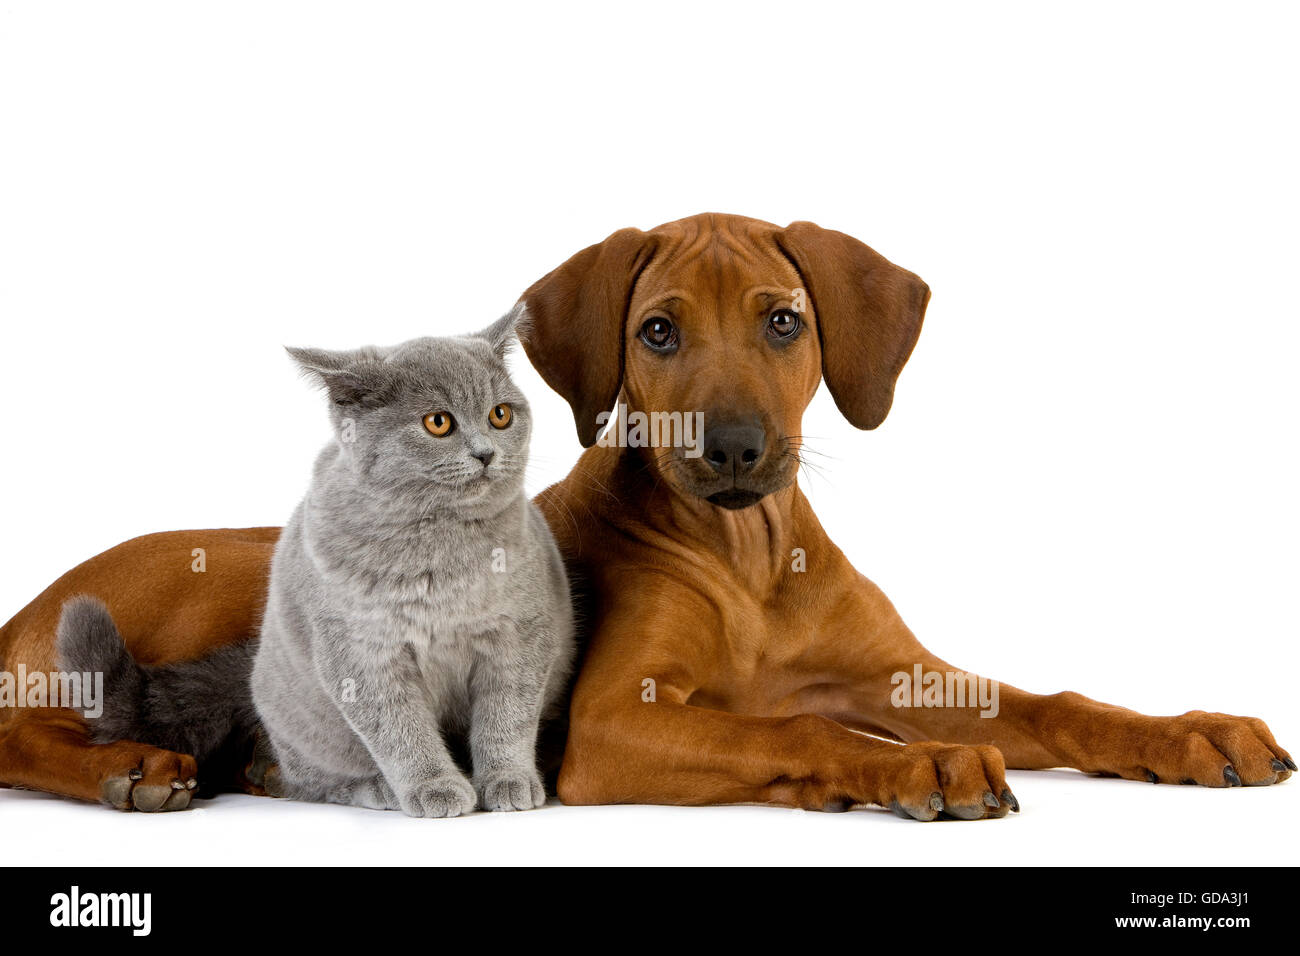 BRITISH SHORTHAIR LILAC MALE CAT AND RHODESIAN RIDGEBACK 3 MONTHS OLD PUPPY Stock Photo